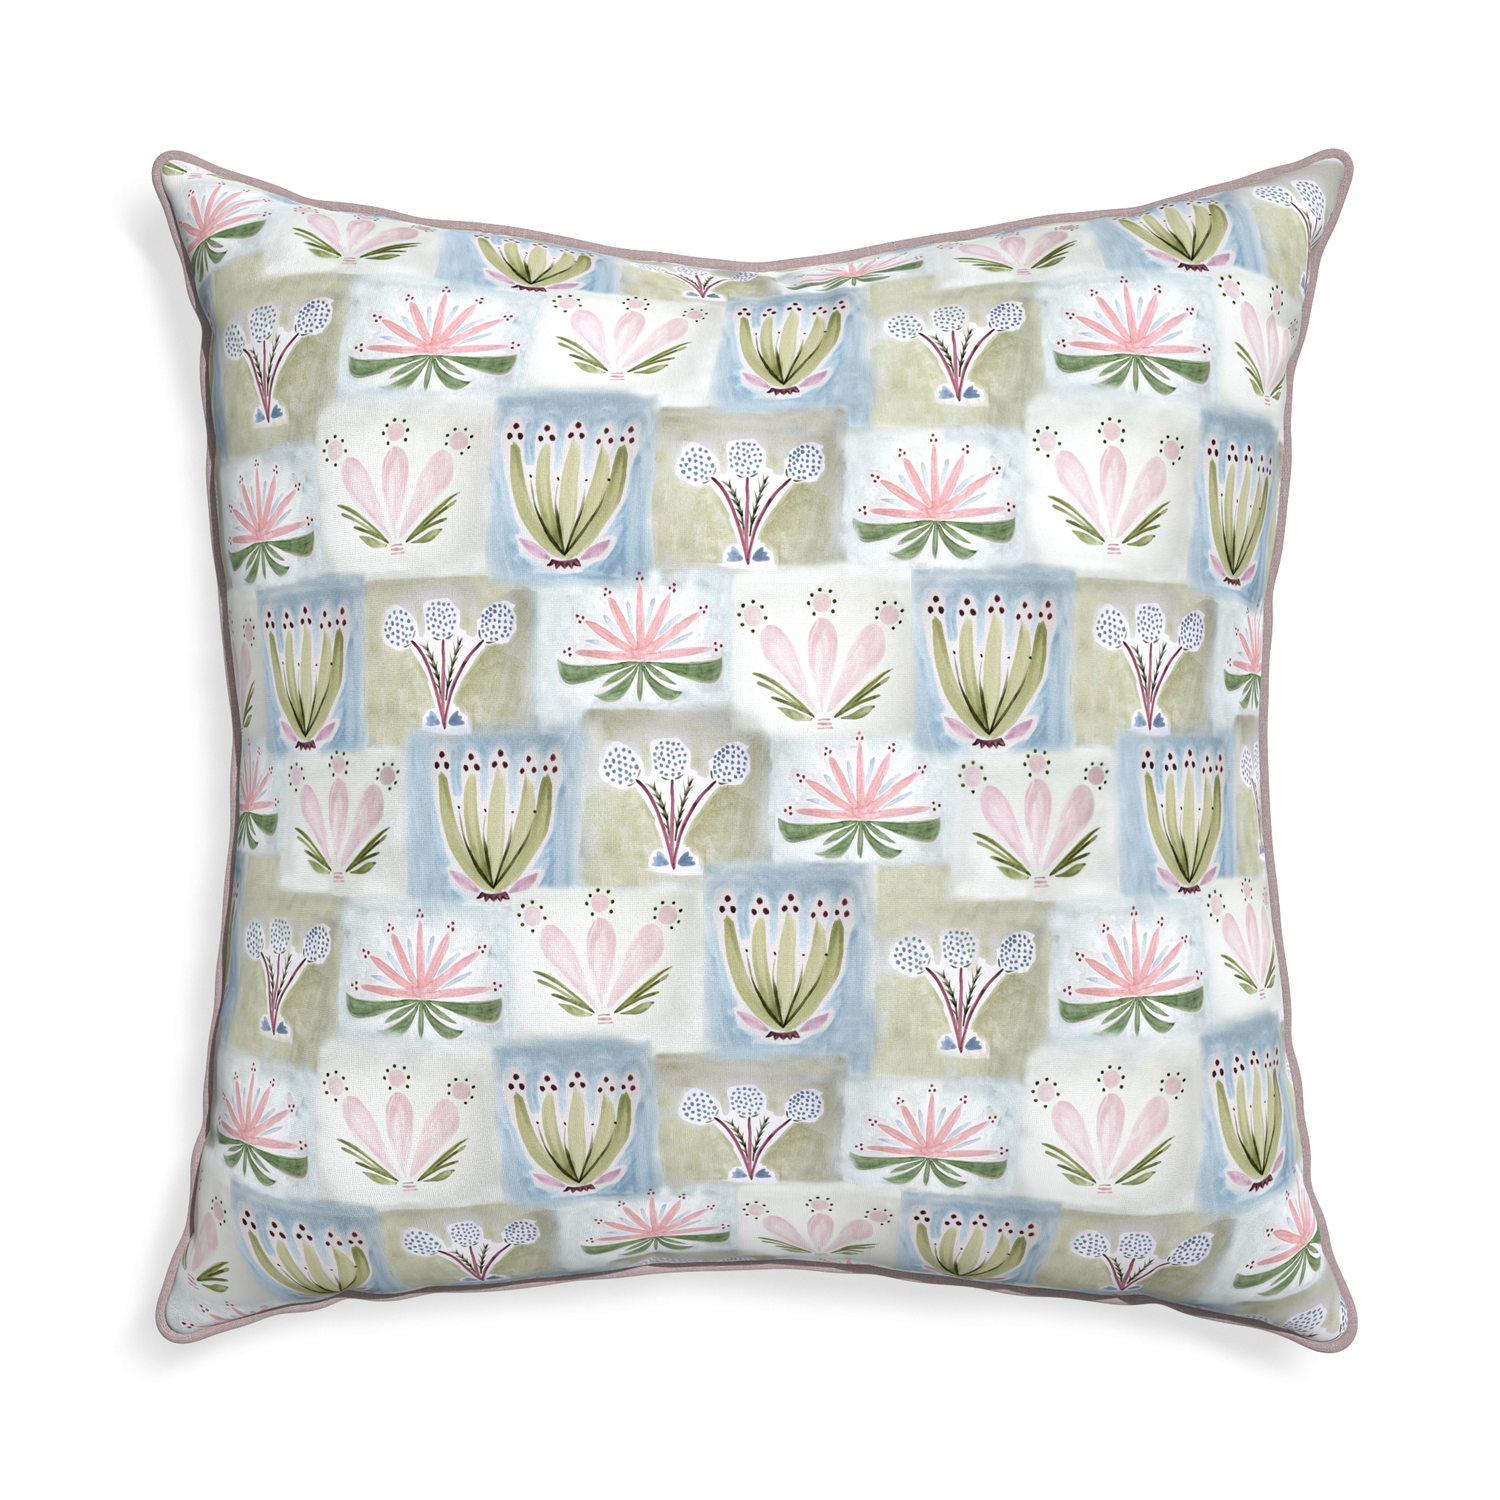 Euro-sham harper custom hand-painted floralpillow with orchid piping on white background